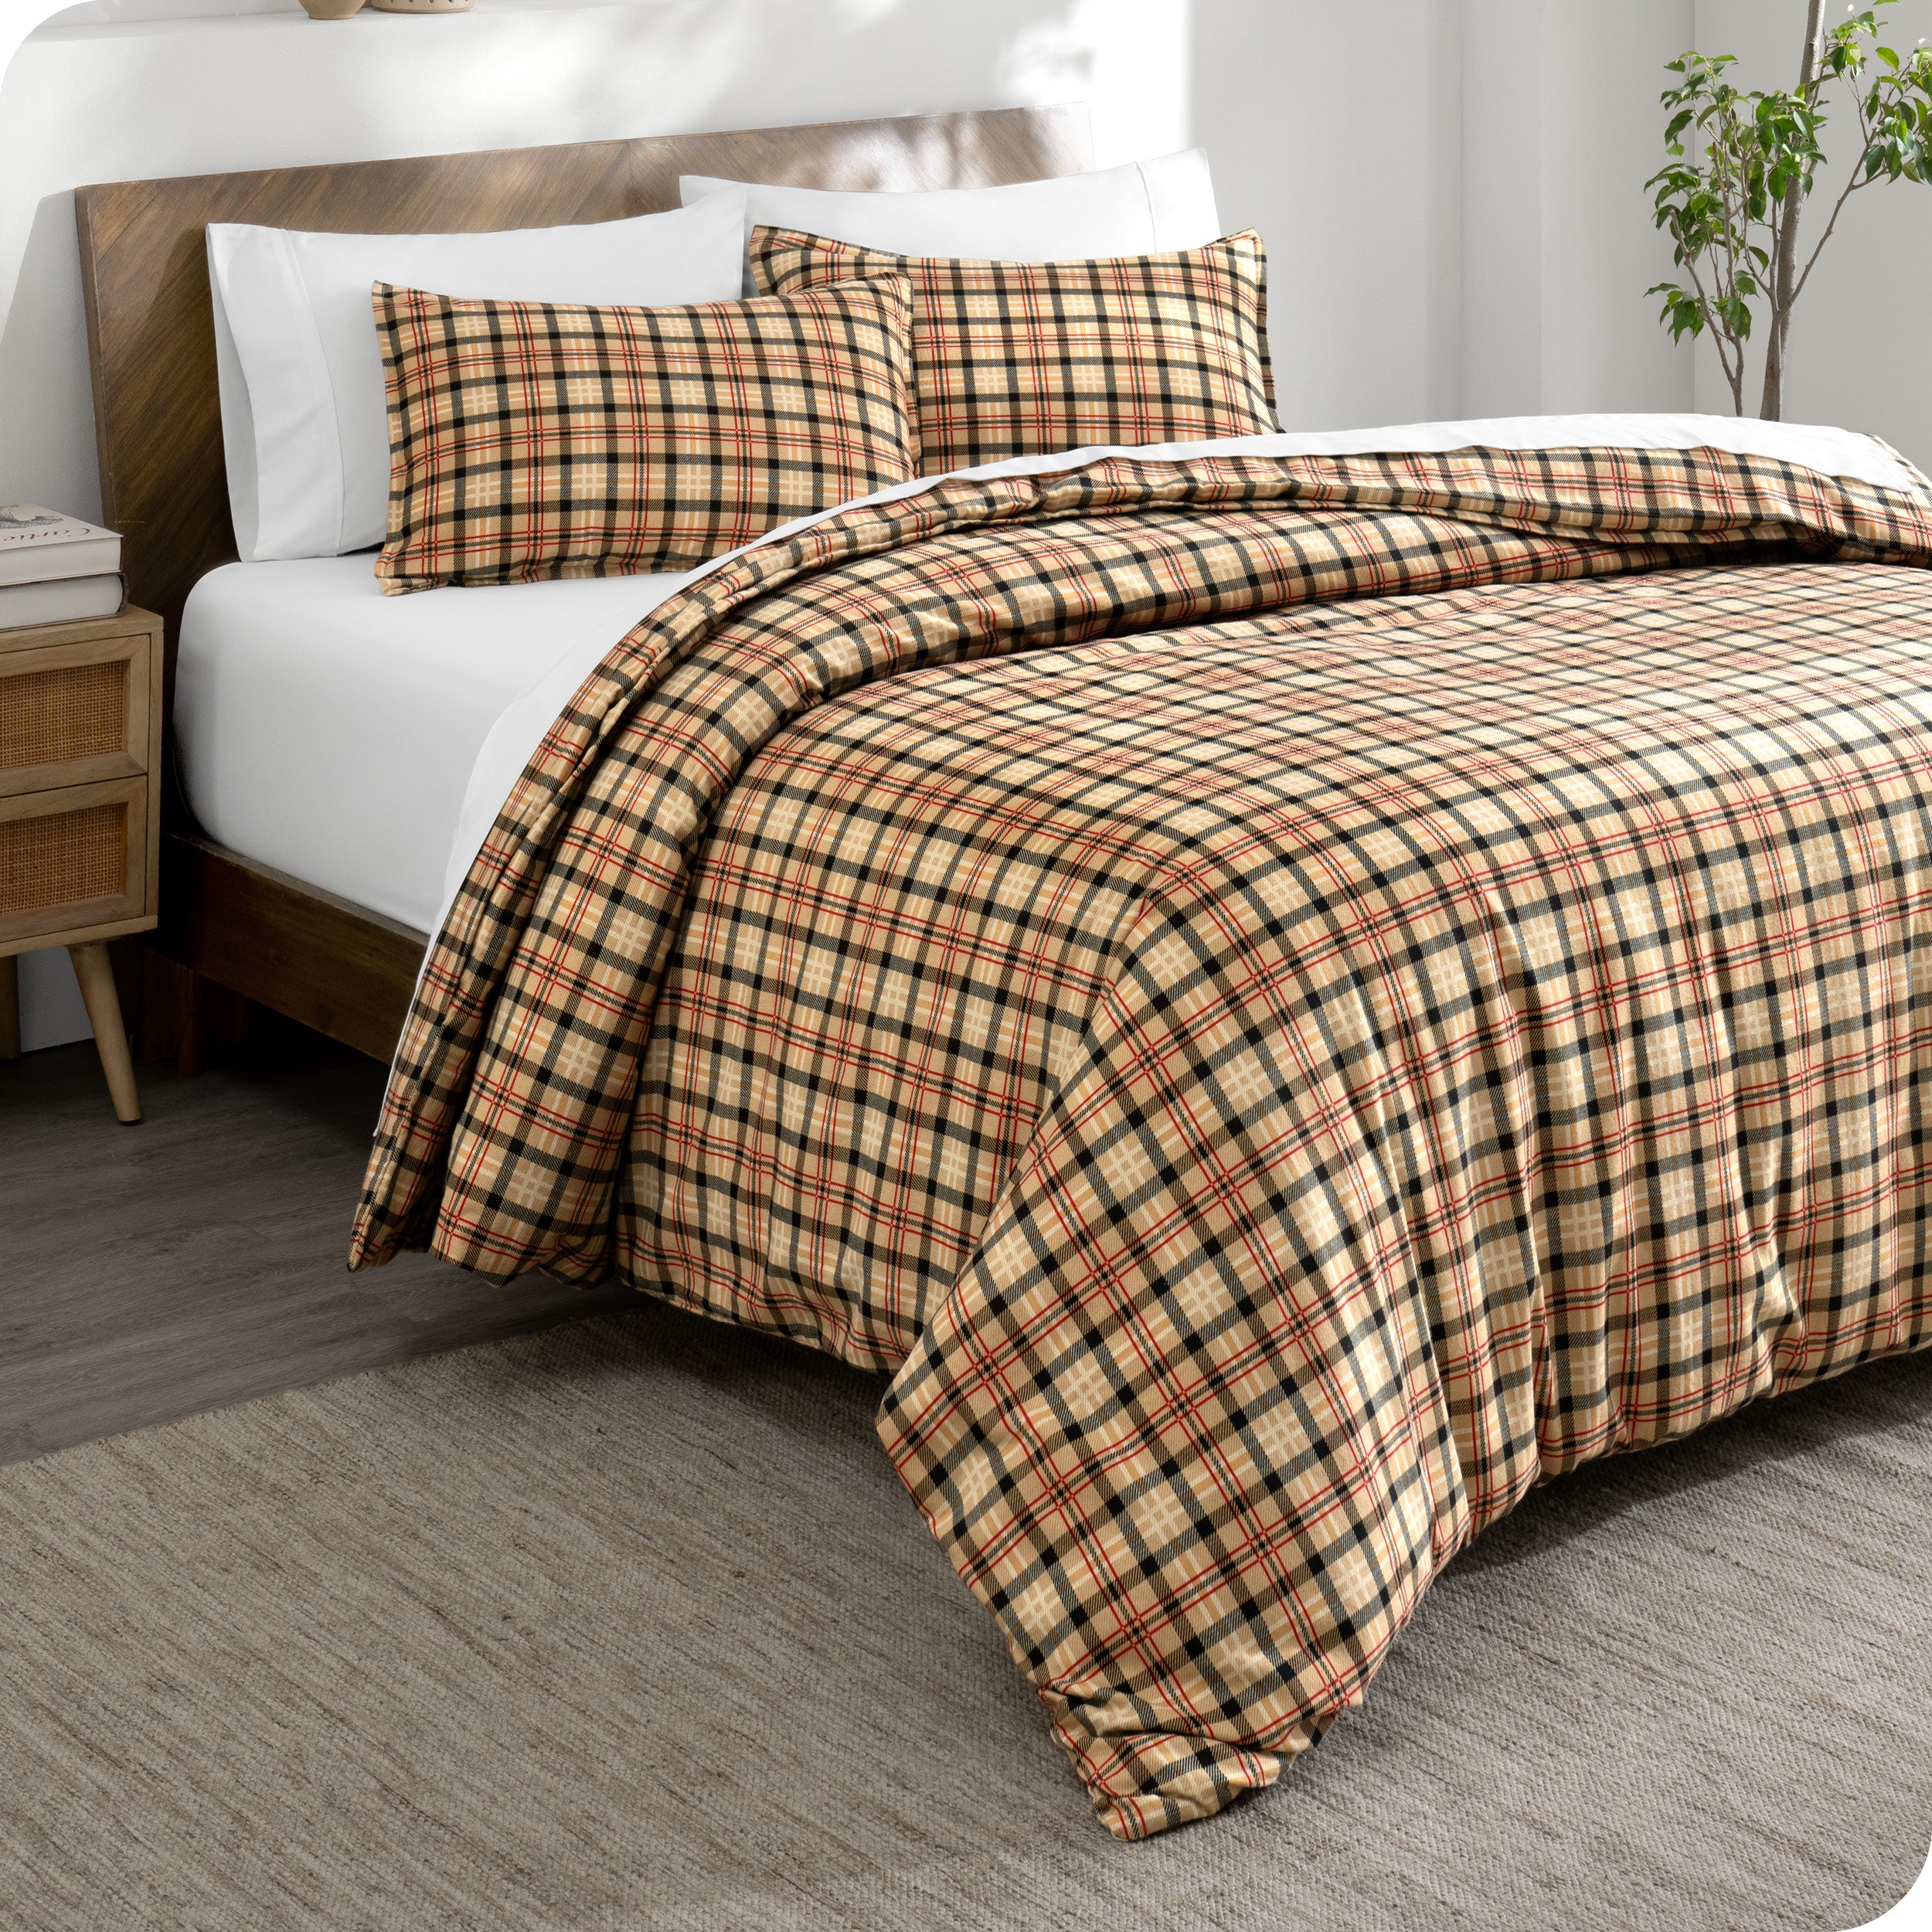 Plaid duvet cover and shams laid out on a bed